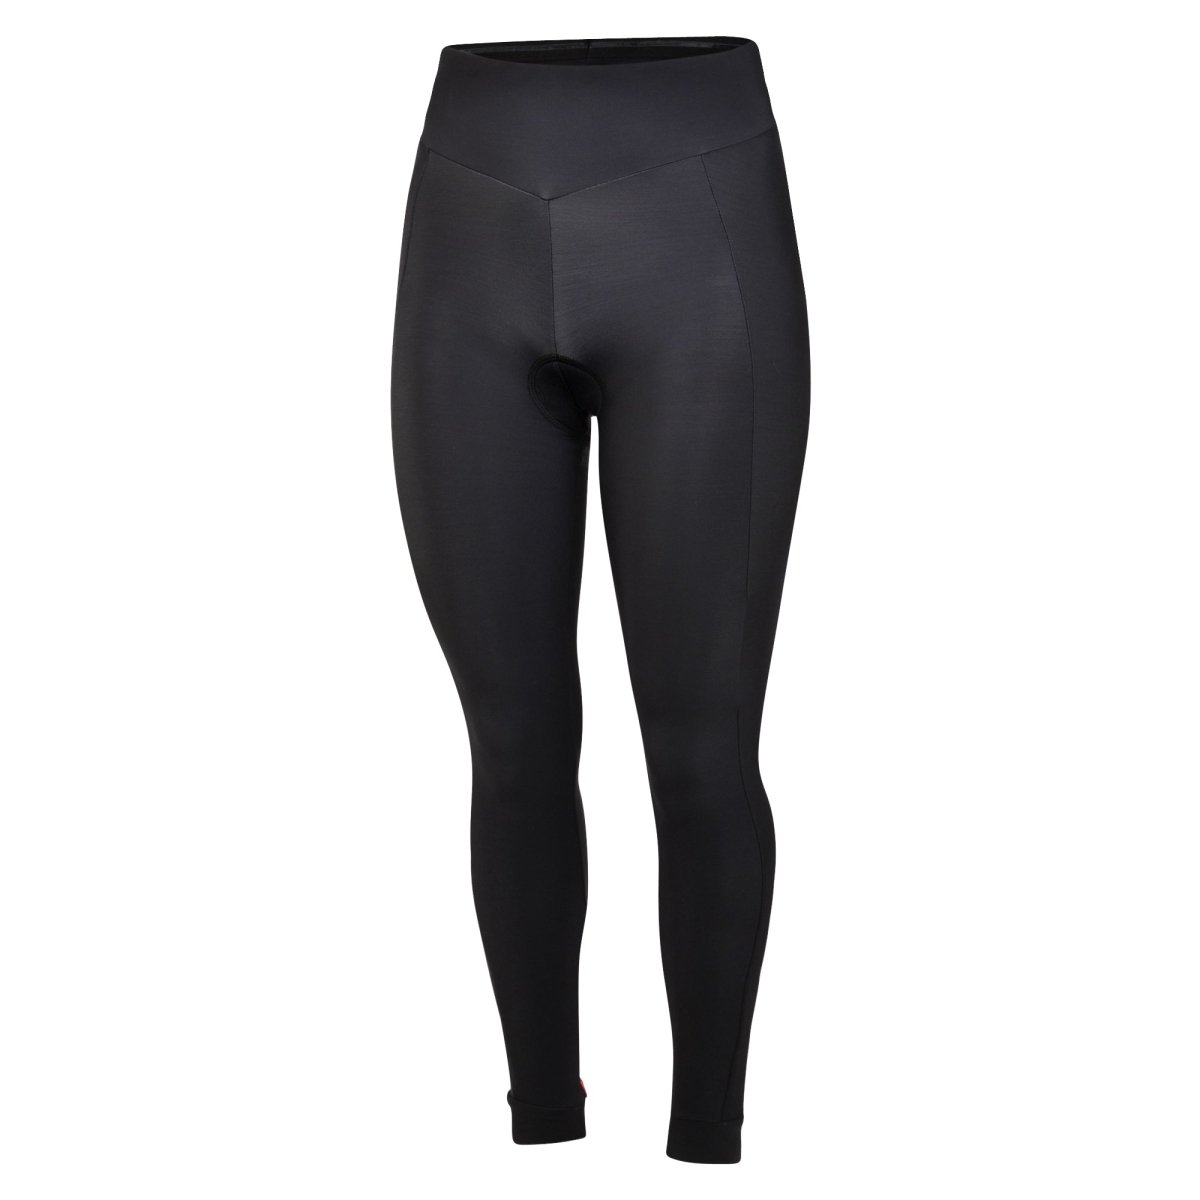 Buy Women's Cold Weather Thermal Cycling Tights Padded Black